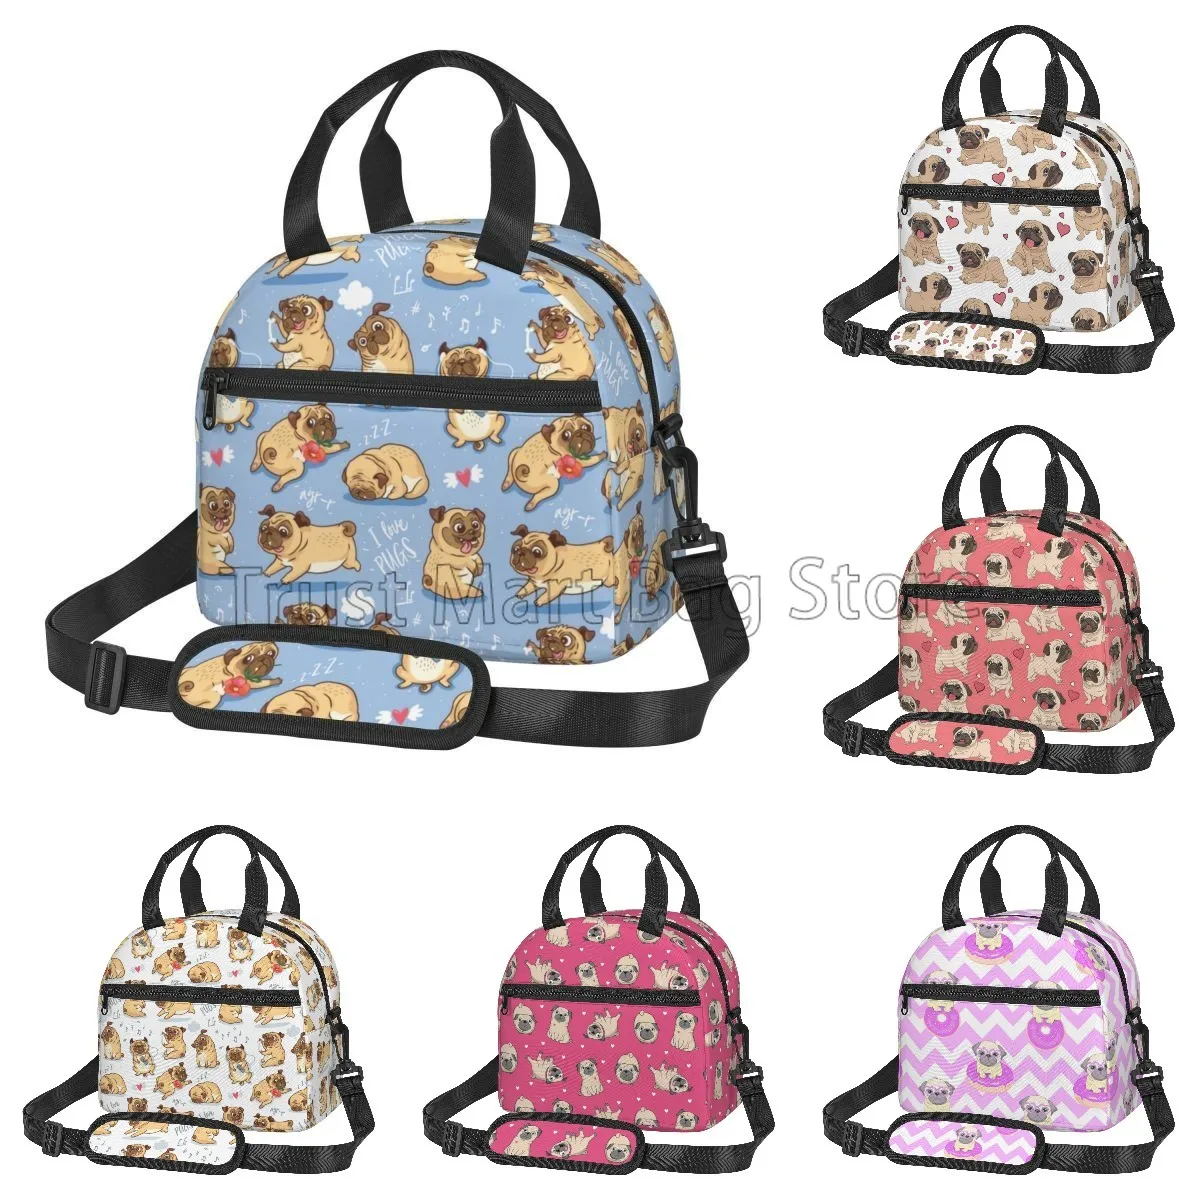 

Cute Pug Dog Insulated Lunch Bag for Women Kids Thermal Lunch Box Portable Cooler Tote Bags for School Work Picnic Beach Travel